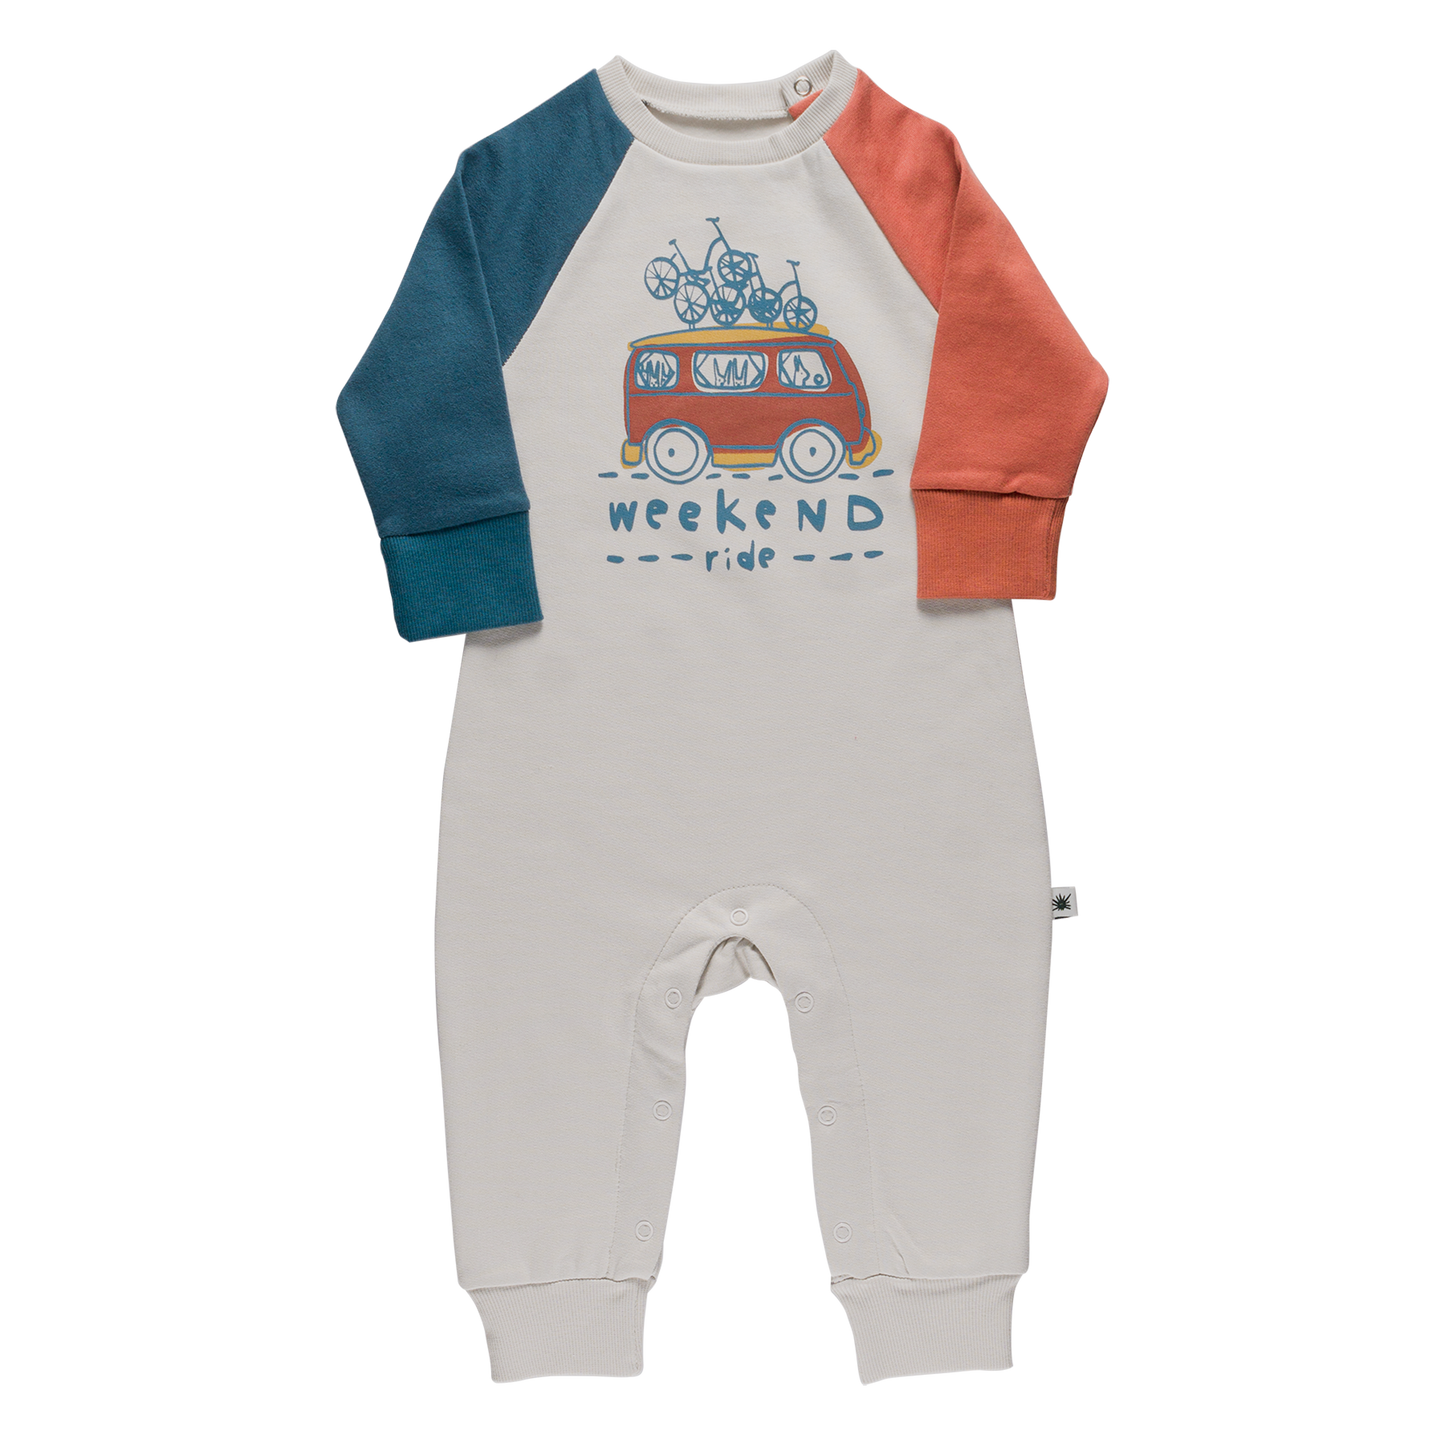 Organic Sing Jumpsuit -Aged 3m to 18m- Colored Light Grey-Blue-Terracotta